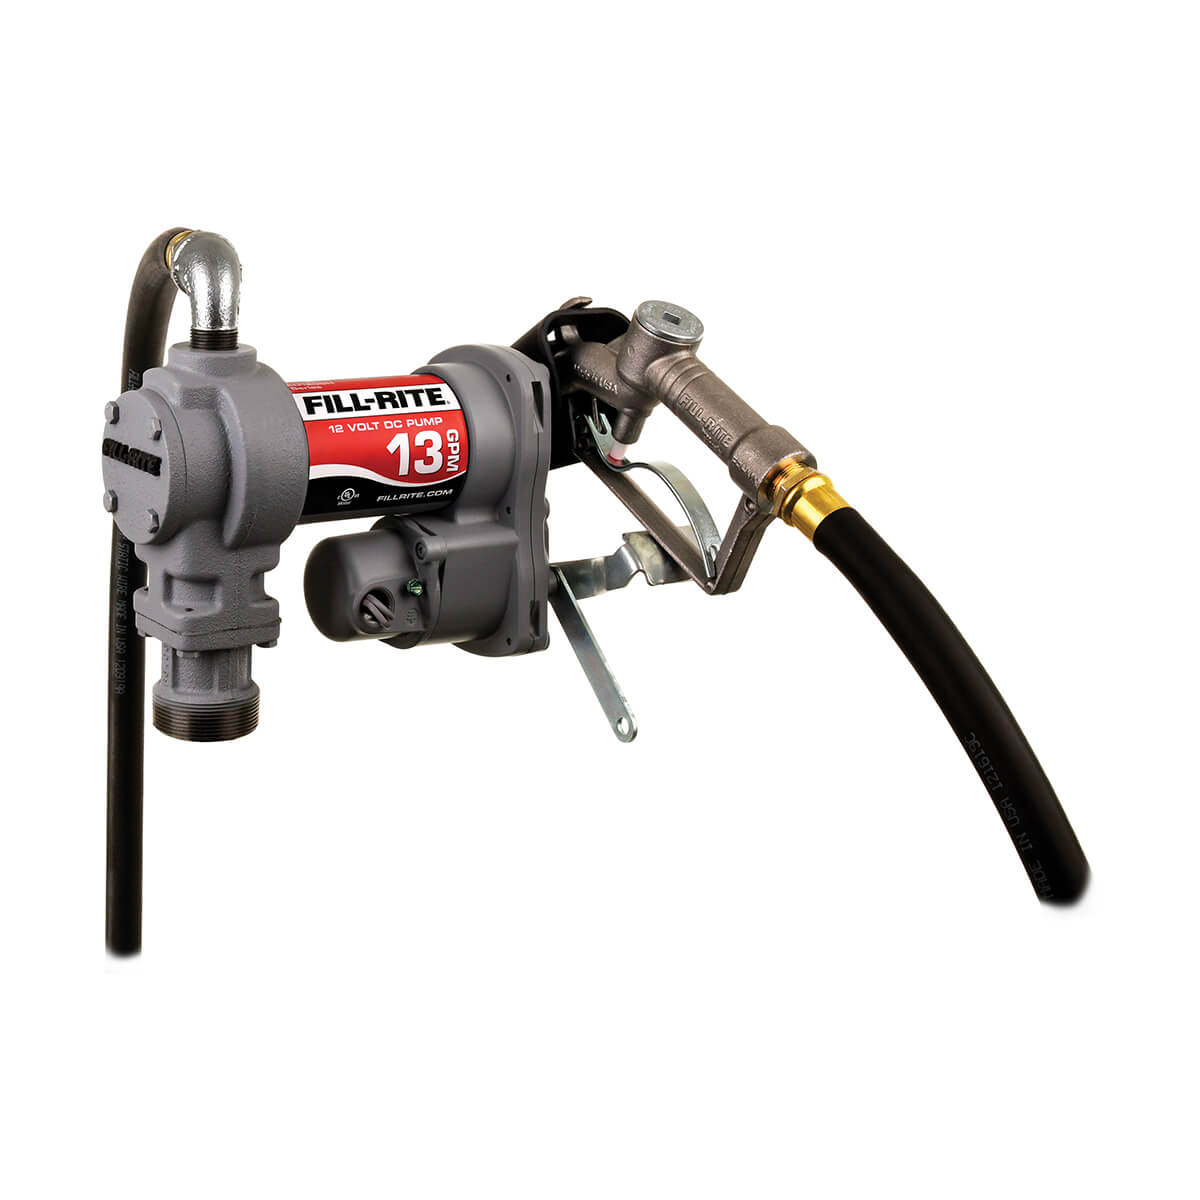 Fill-Rite SD1202G 12V Fuel Pump with Hose and Manual Nozzle